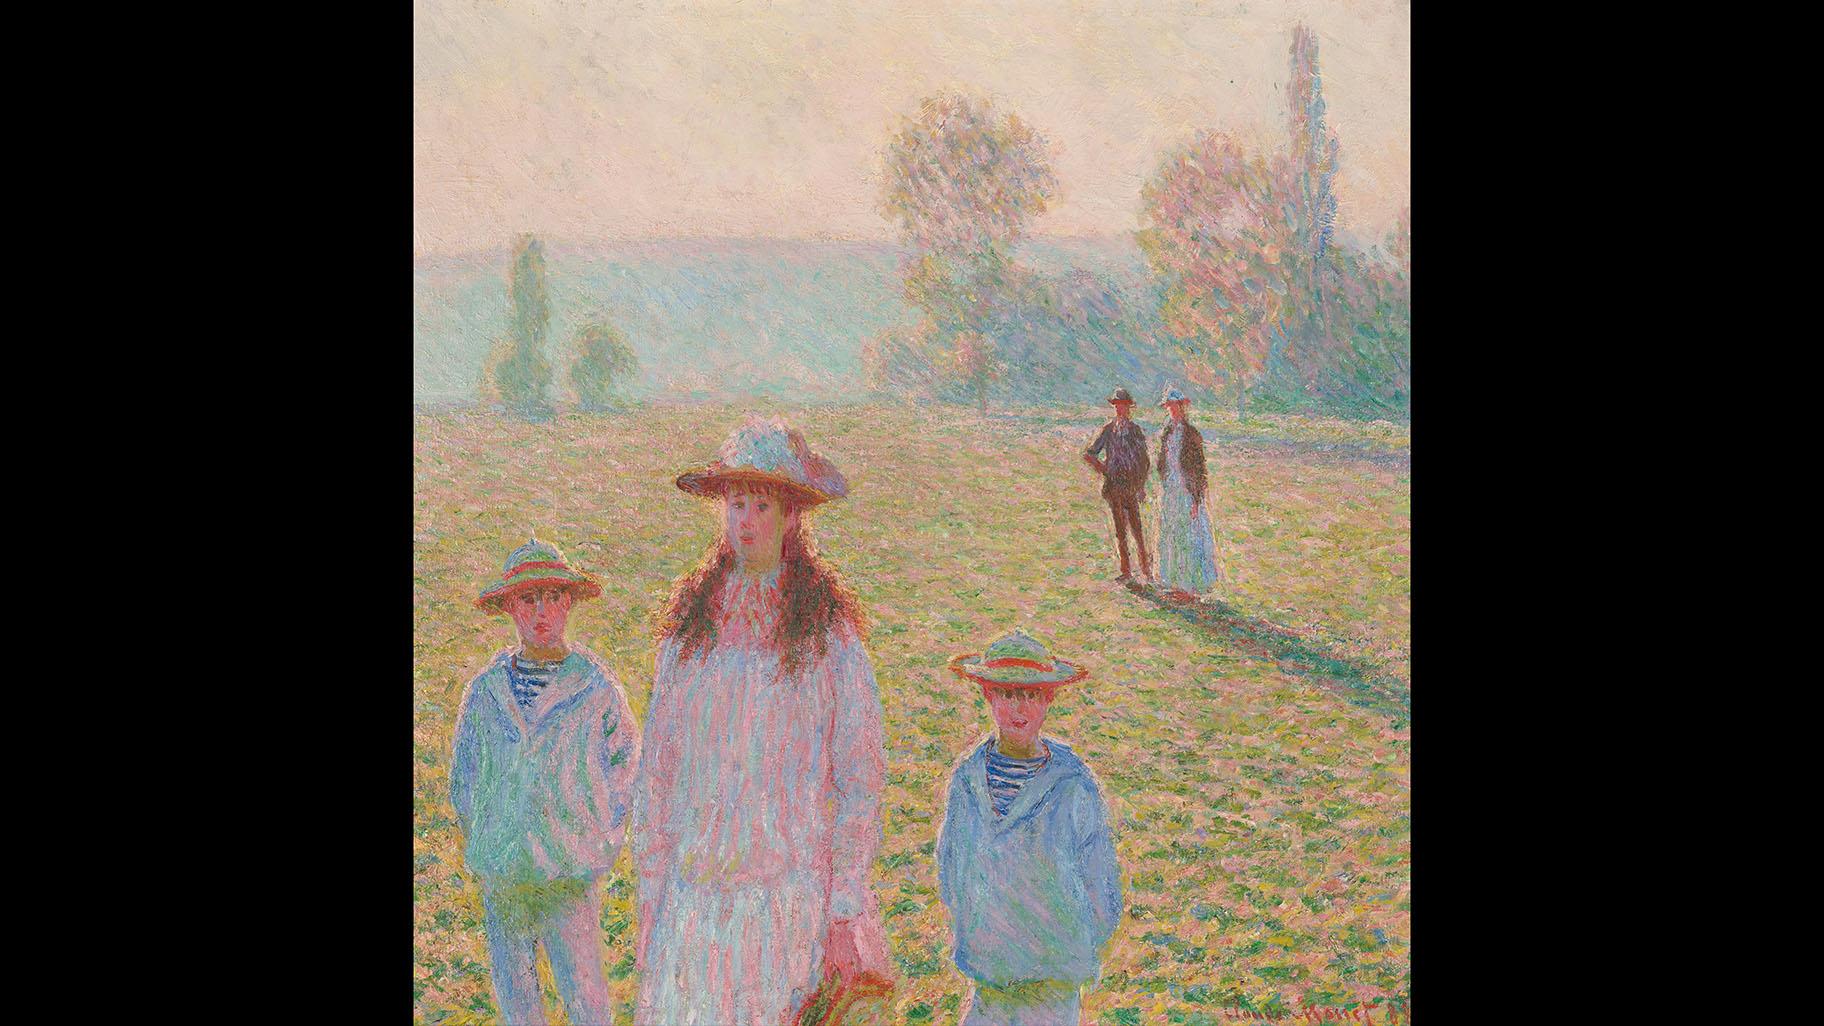 Claude Monet. Landscape with Figures, Giverny, 1888. Private collection.